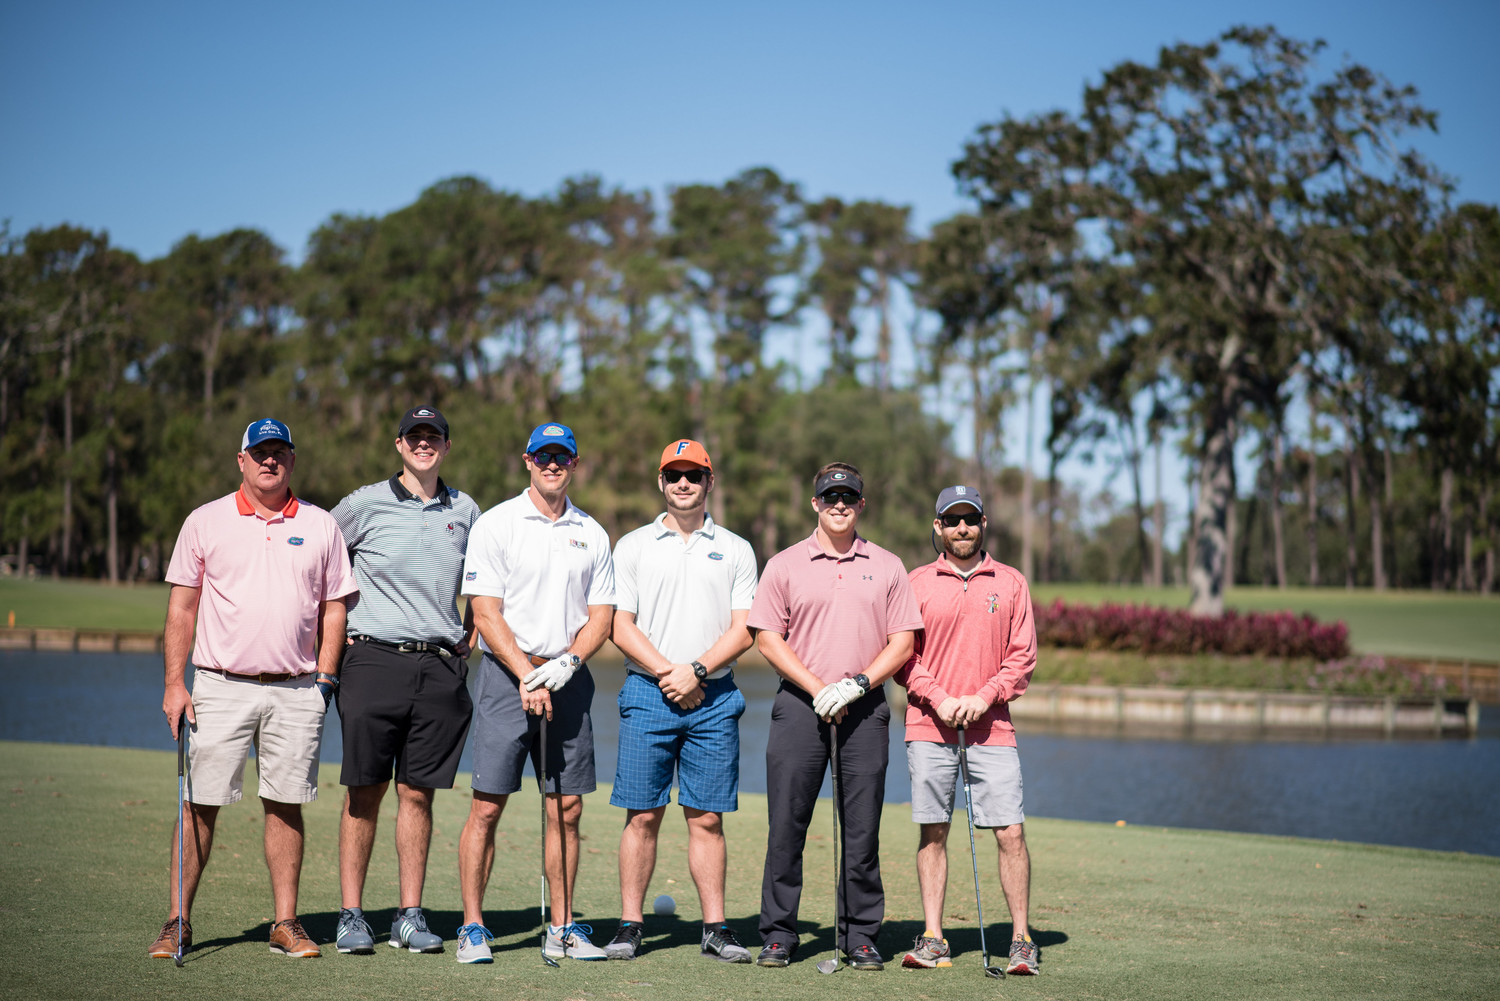 Danny Wuerffel (third from left) gathers with his foursome from Just BARE Chicken (event sponsor) and his nephew Zach.